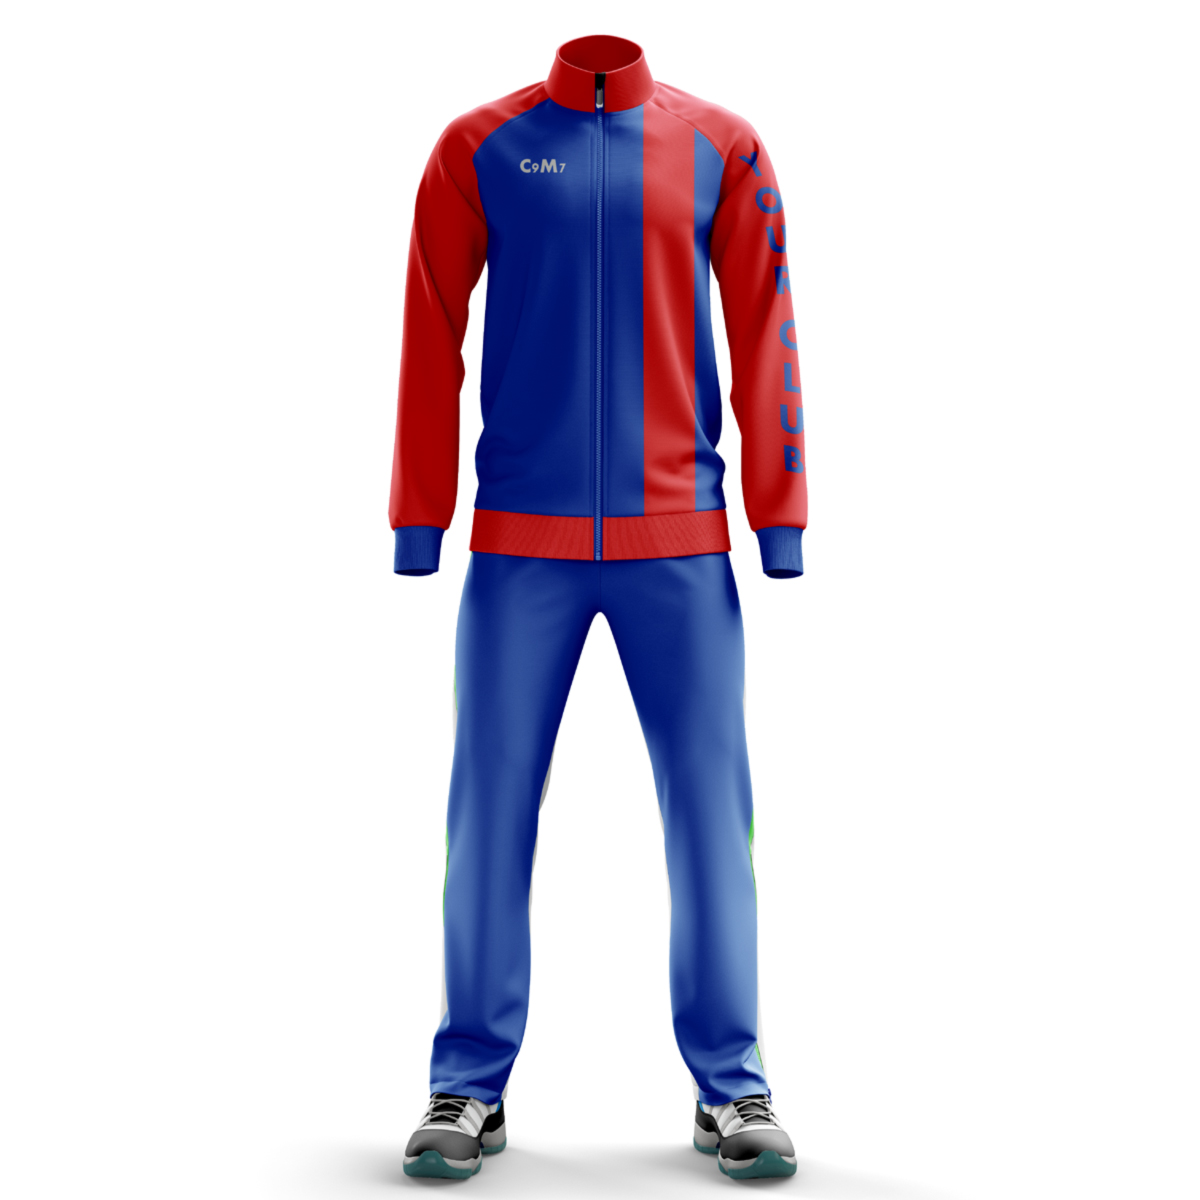 The Pitchside Custom Tracksuit, A Tracksuit For Any Type Of Sports Team